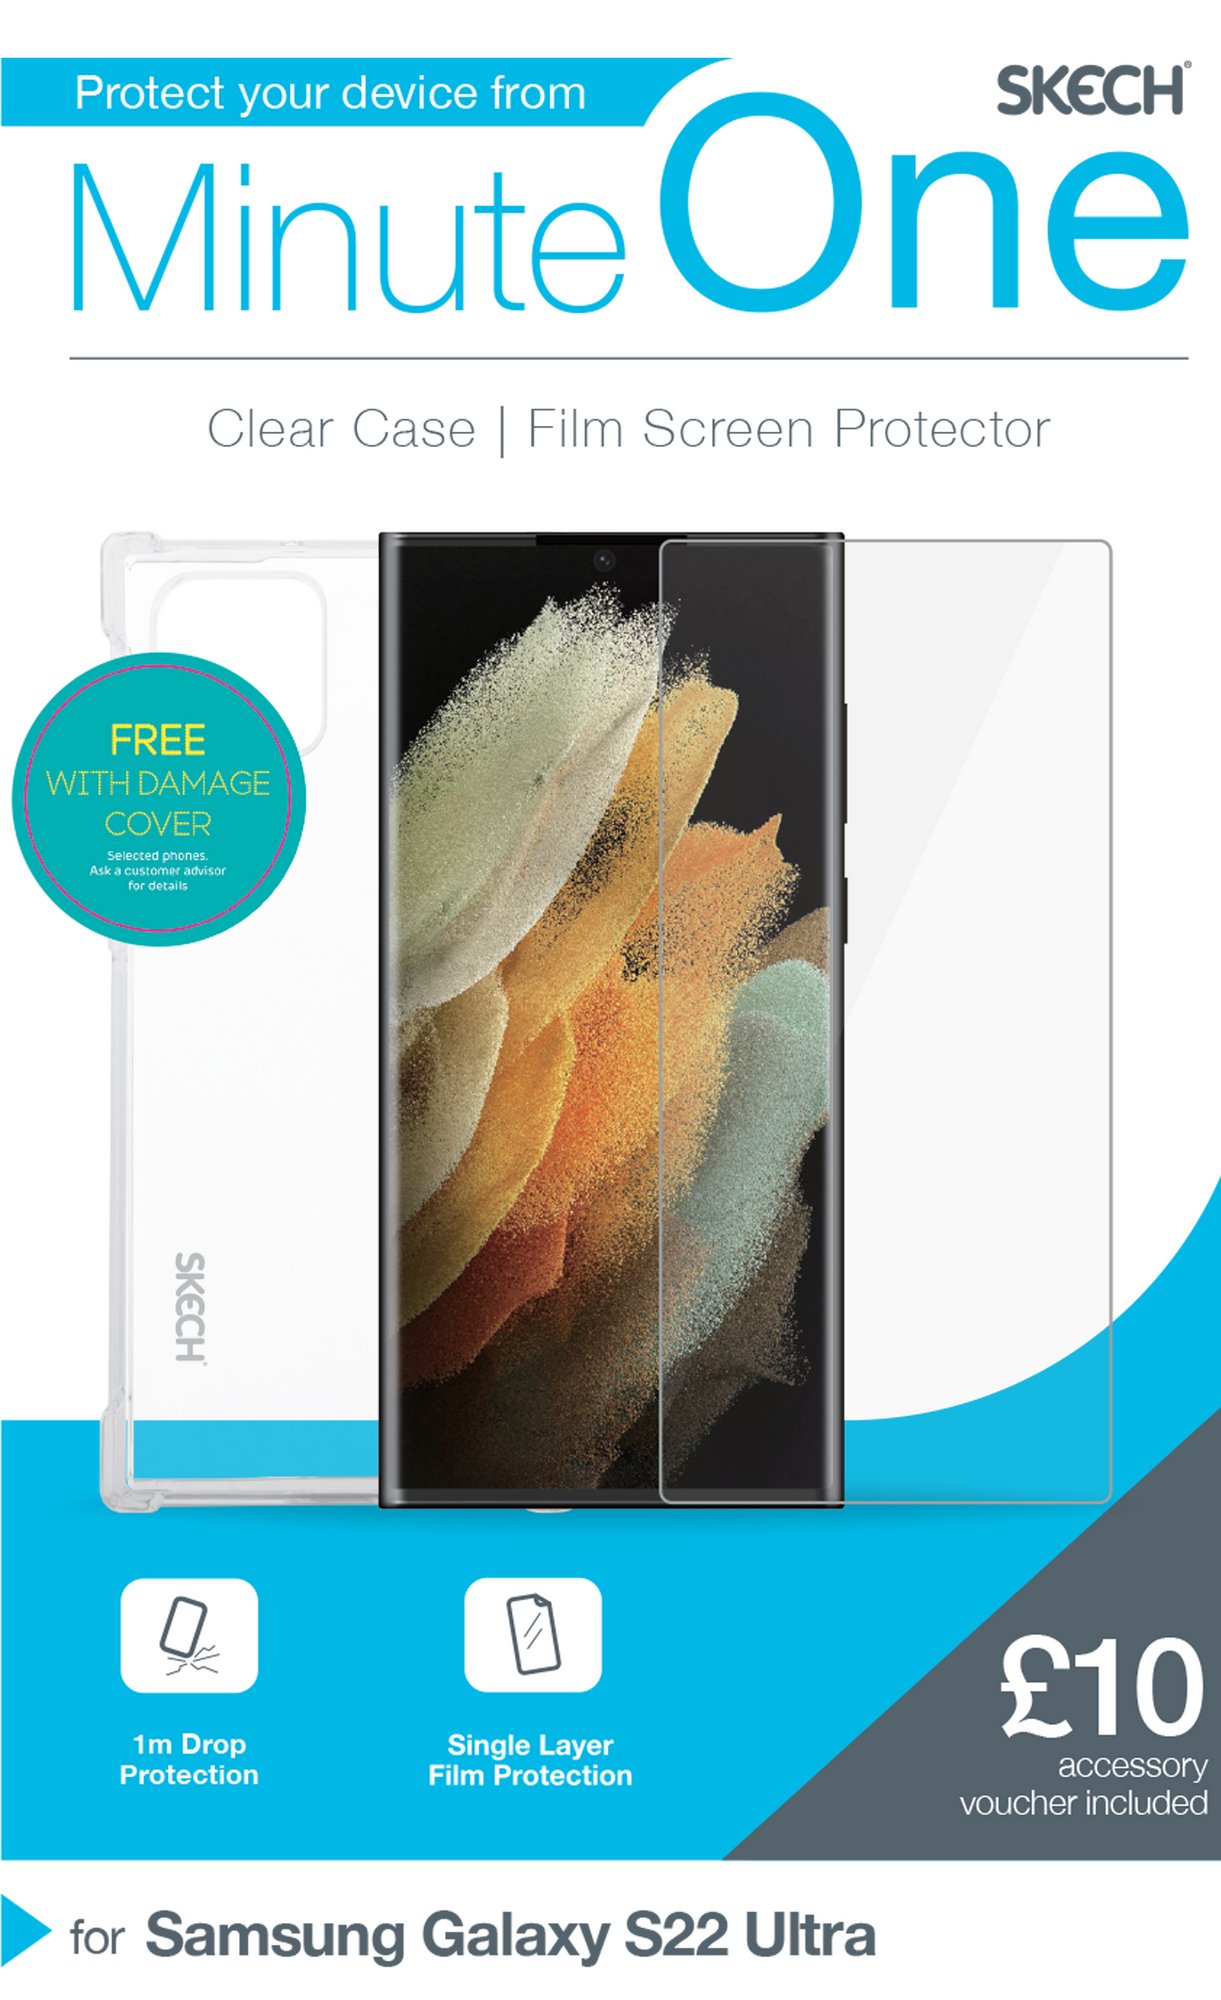 View more Minute One Protect Bundle Samsung S22 Ultra details